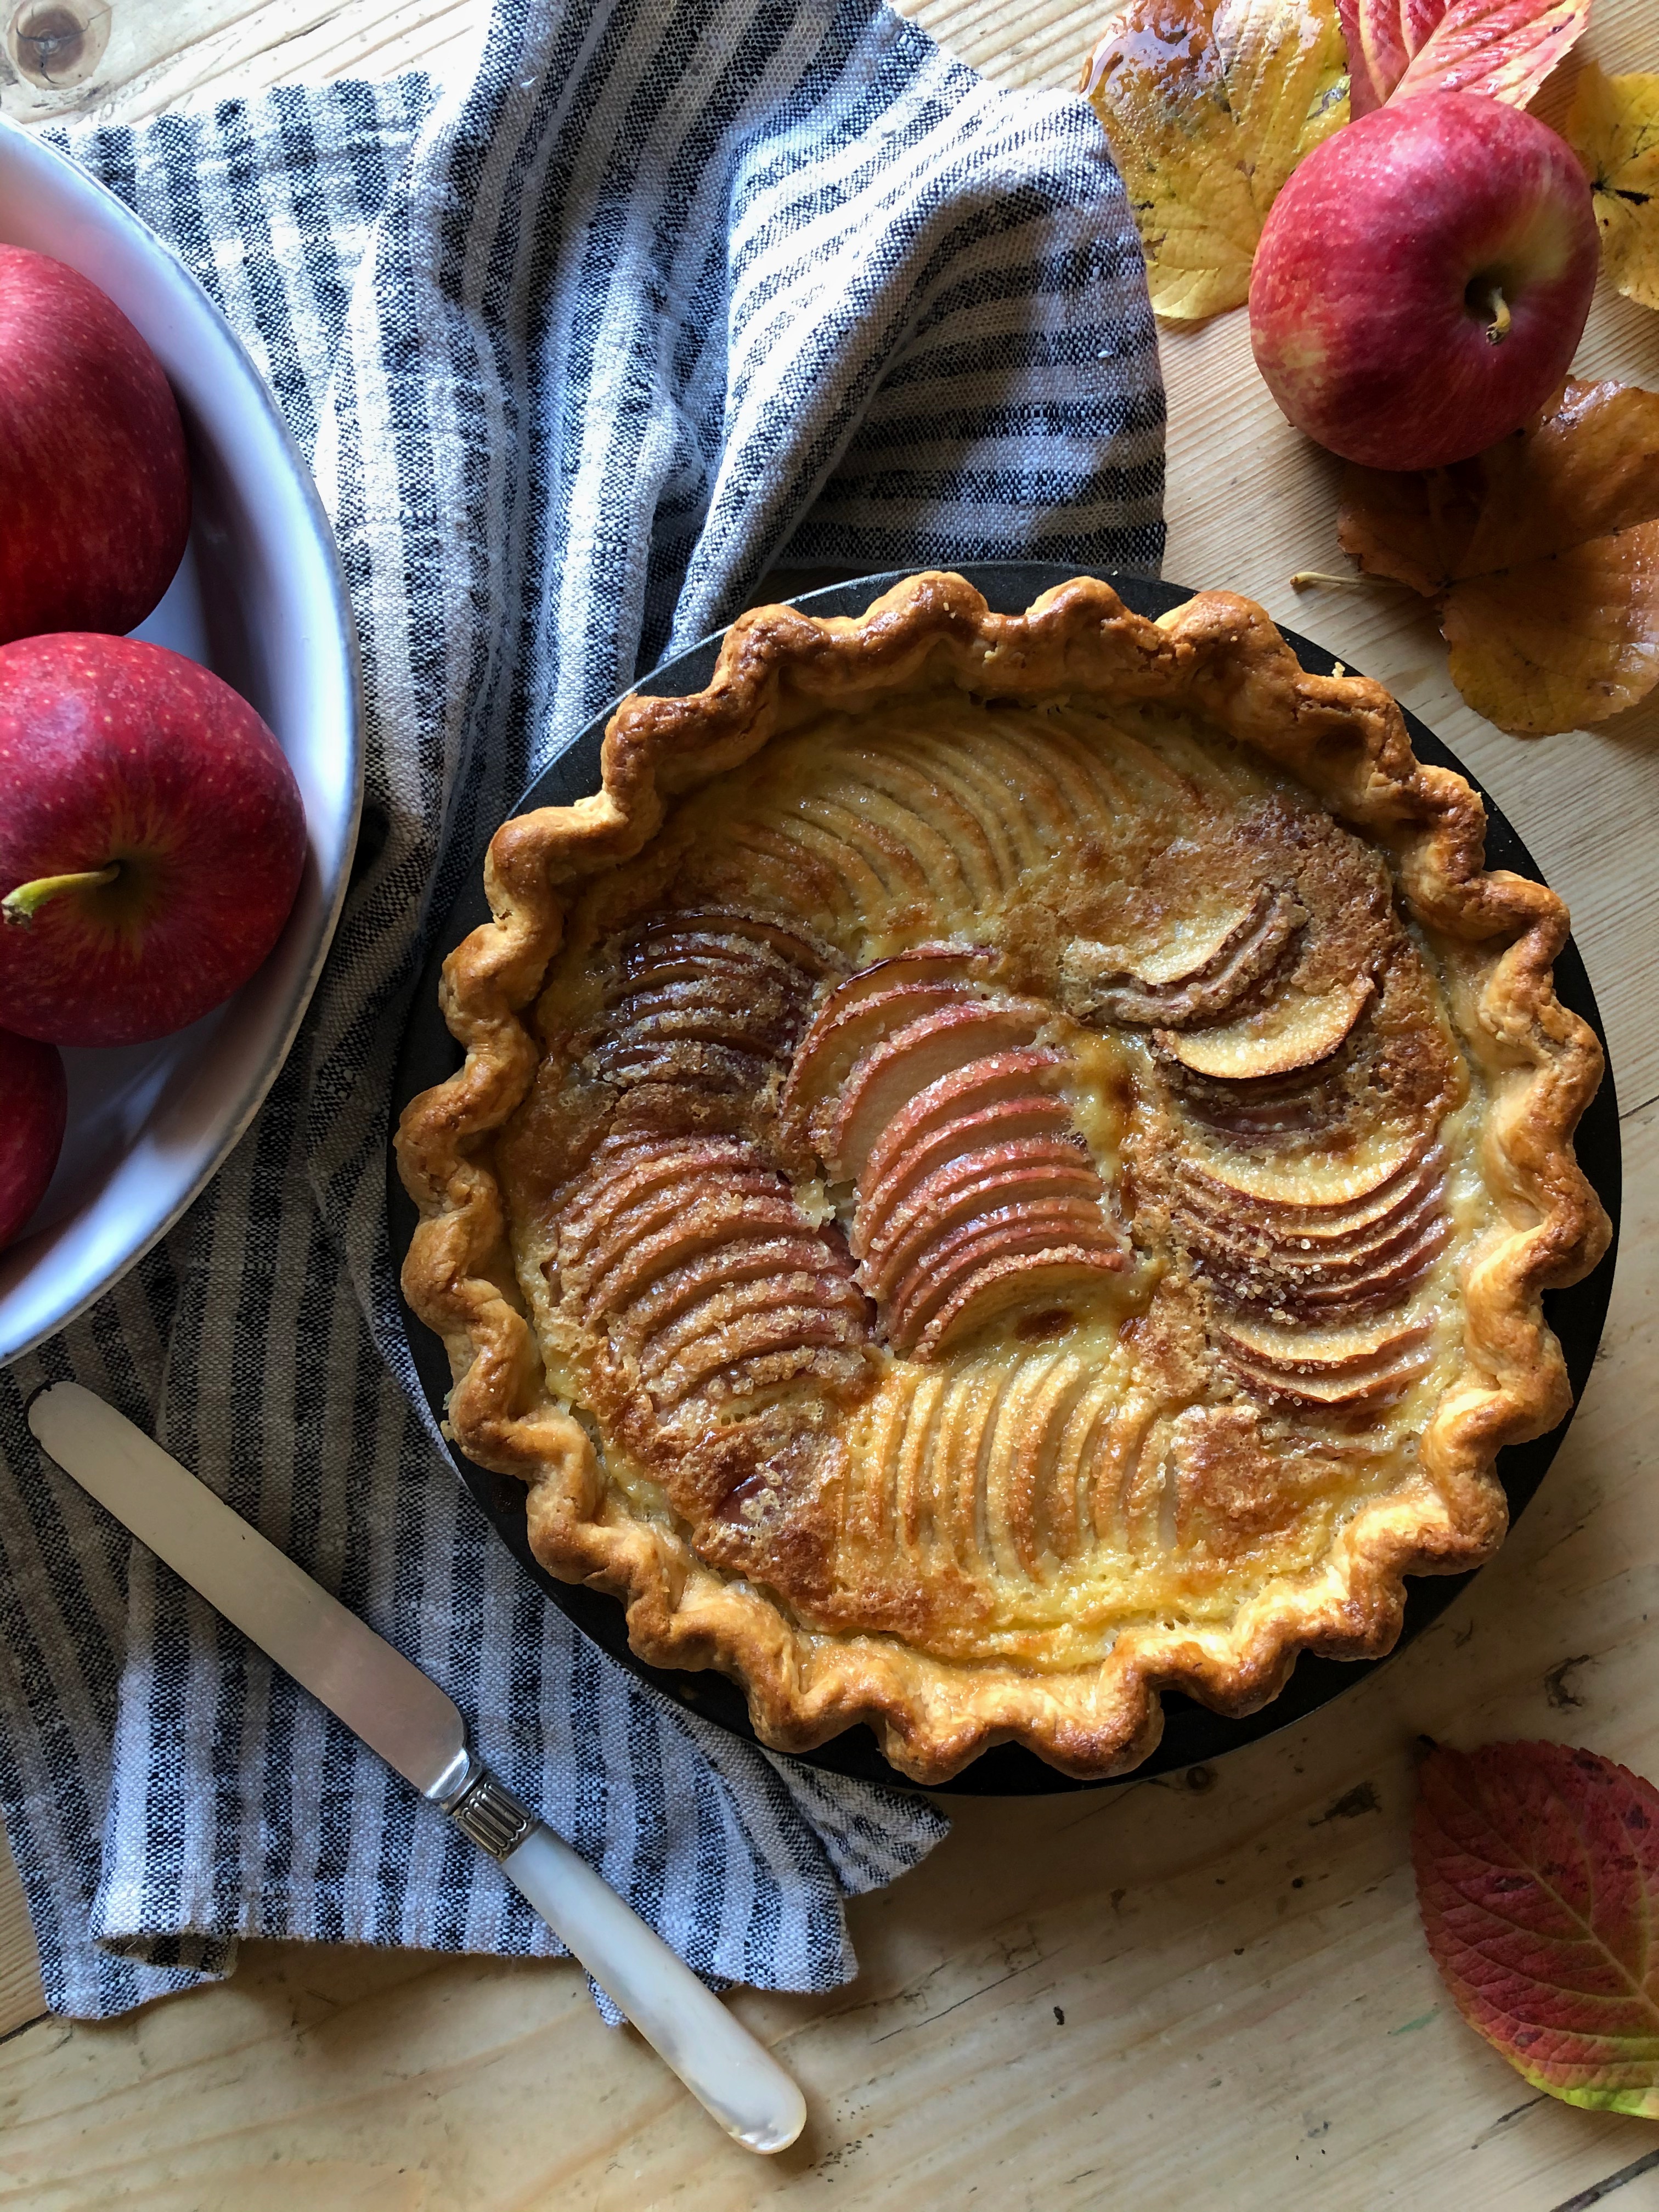 Apple tart normande - a crisp pastry tart filled with apples and a calvados spiked custards